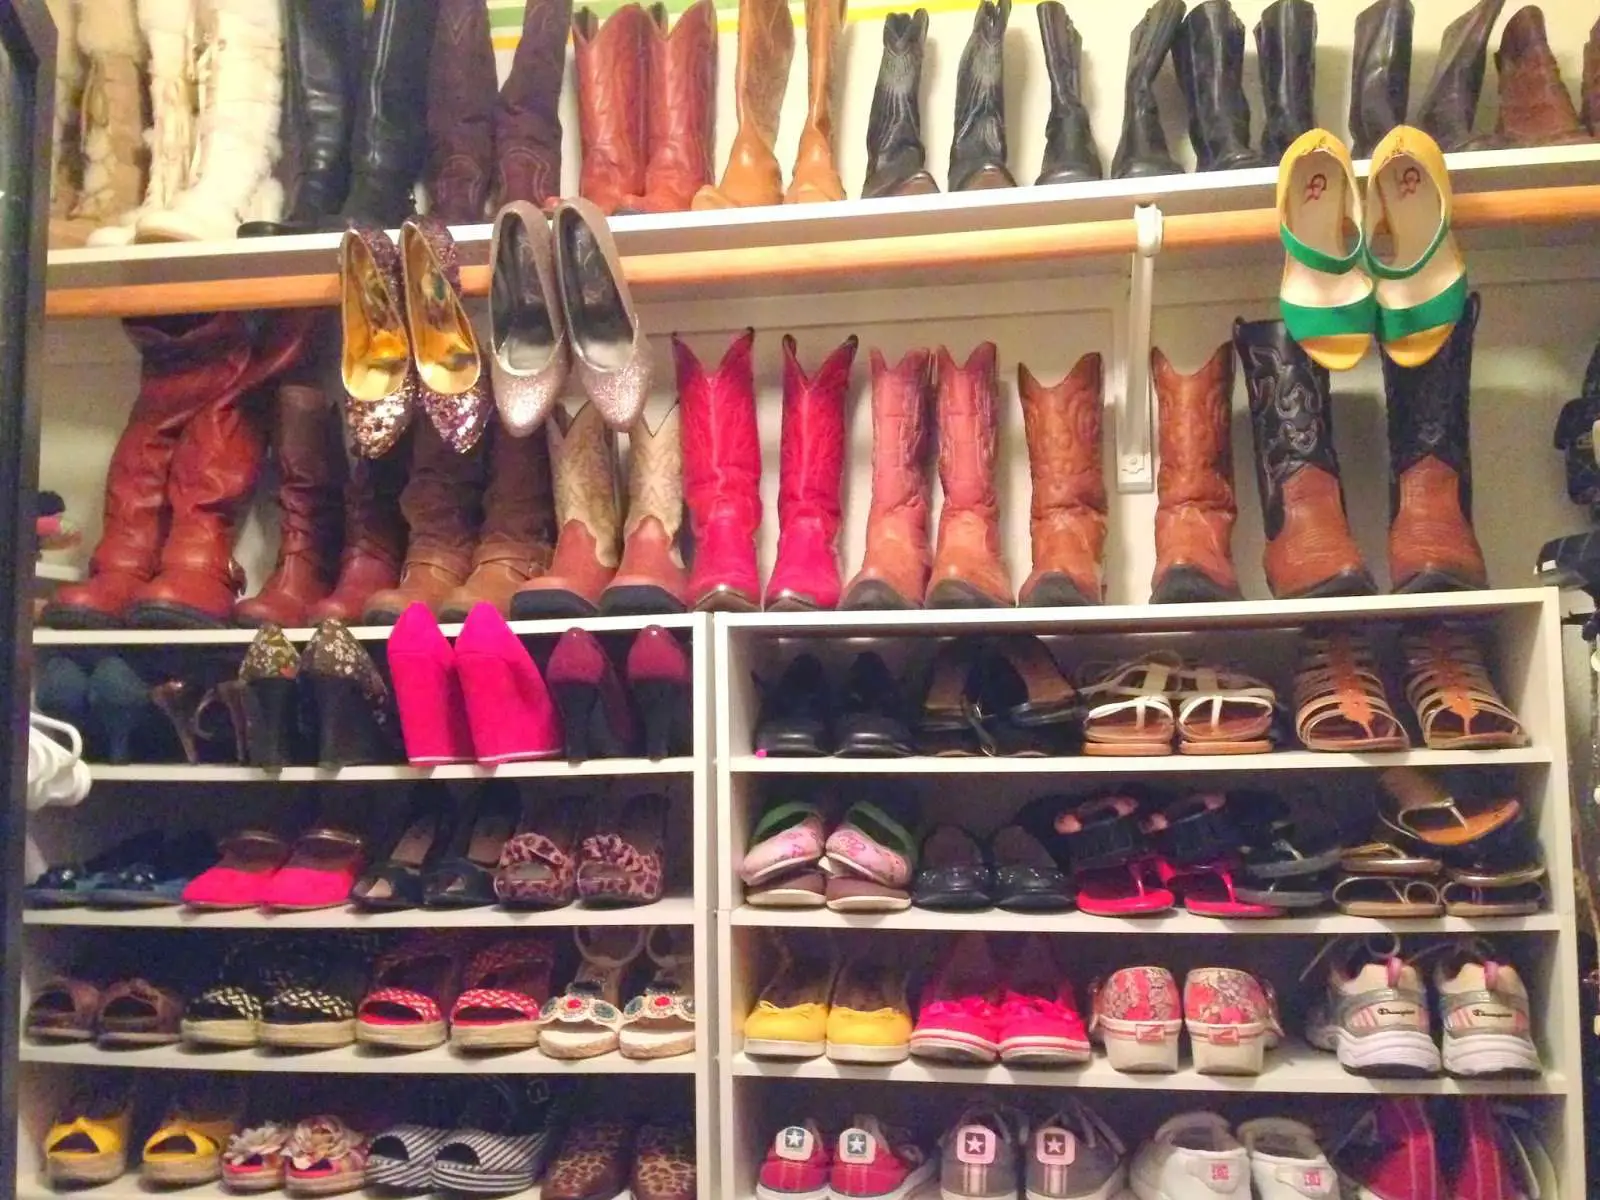 Home & Garden: Organize Your Shoes with ClosetMaid Stacker